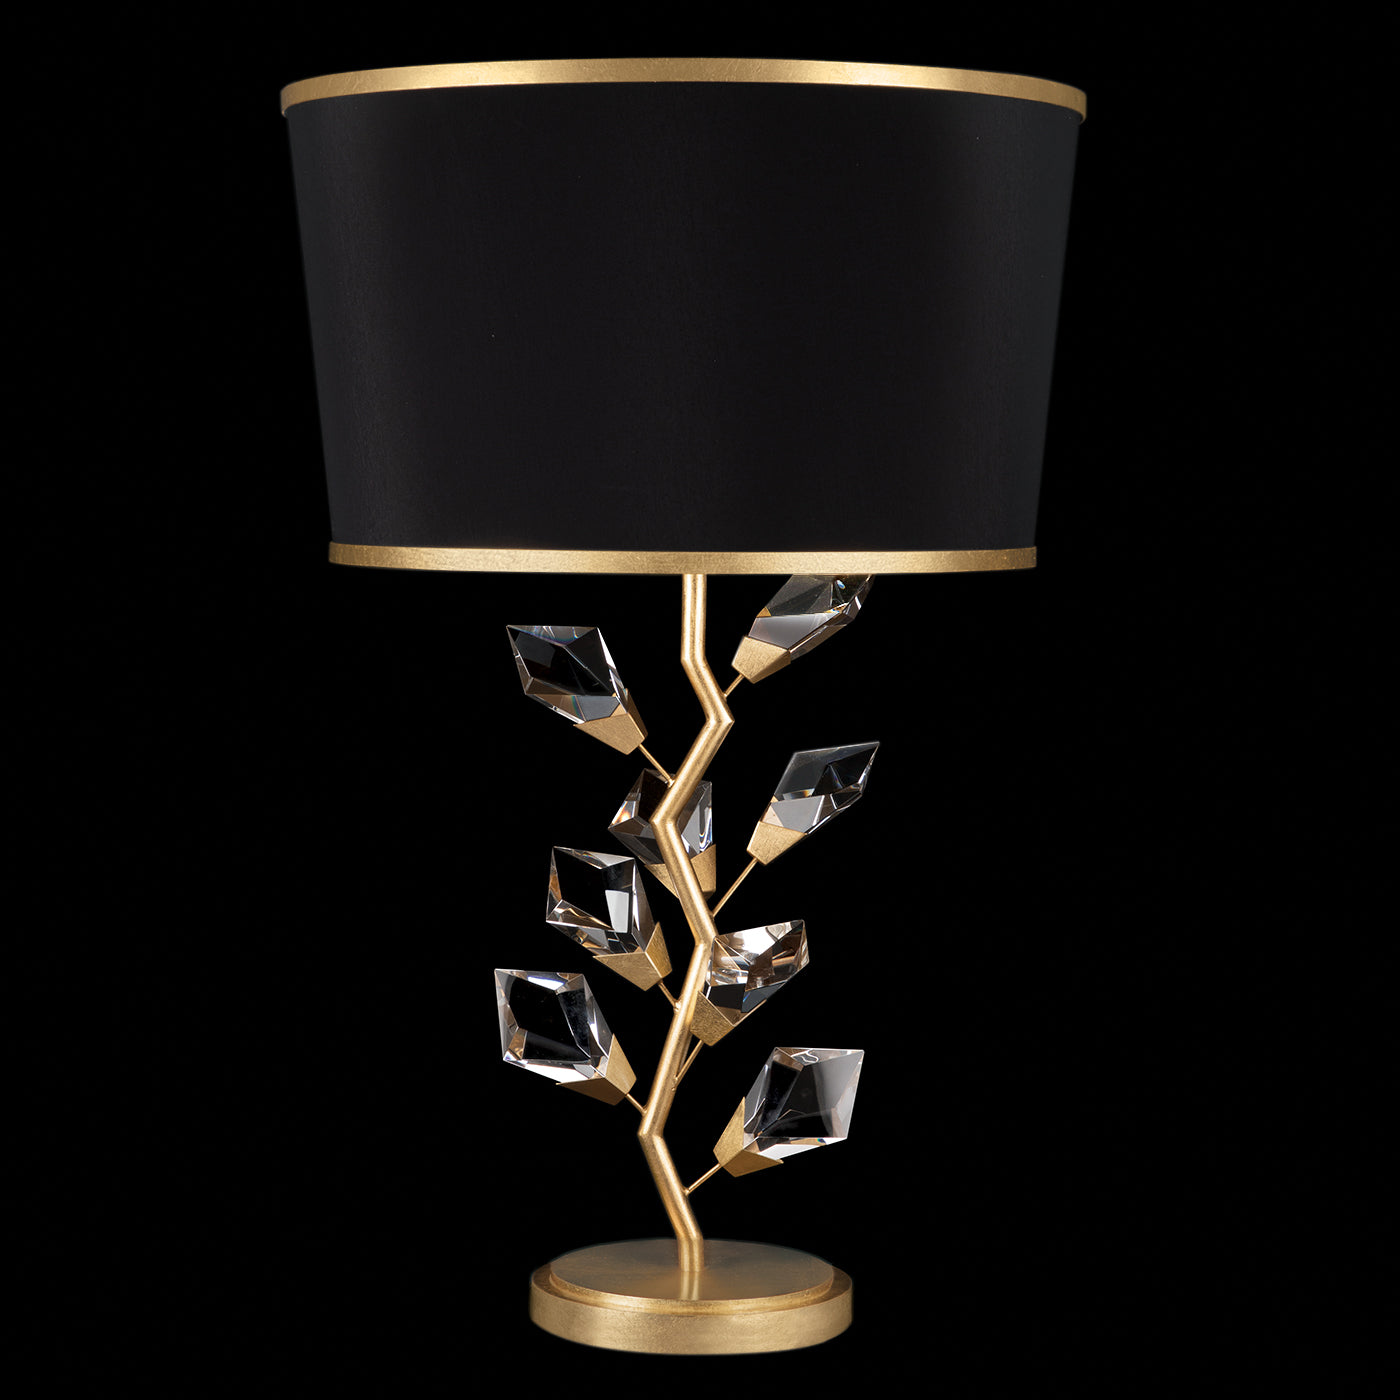 Fine Art Foret 30" Table Lamp Lamp Fine Art Handcrafted Lighting Gold with Black Shade  